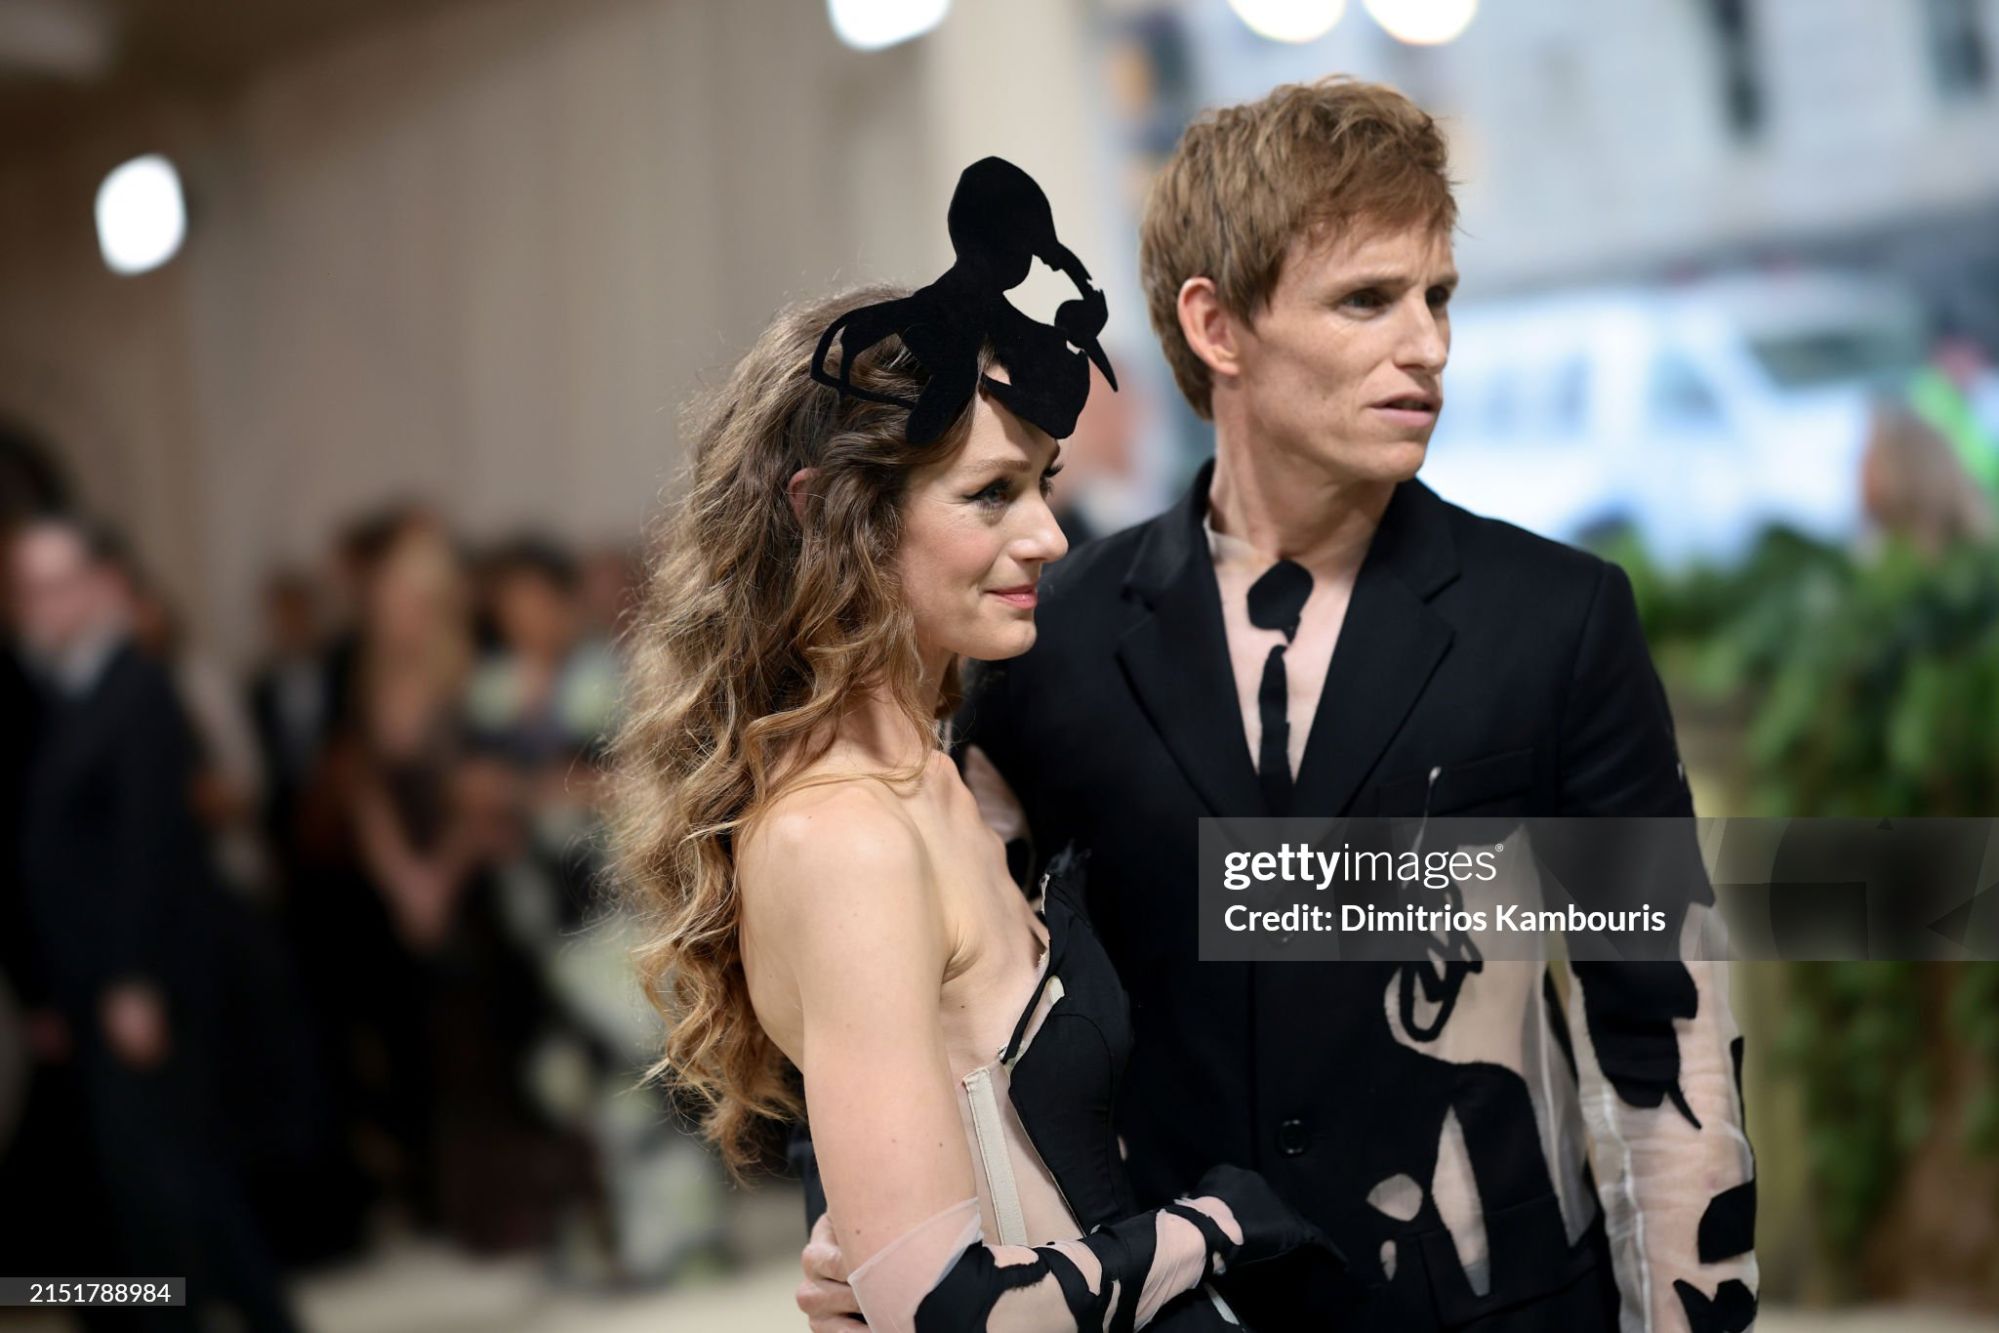 gettyimages-2151788984-2048x2048.jpg